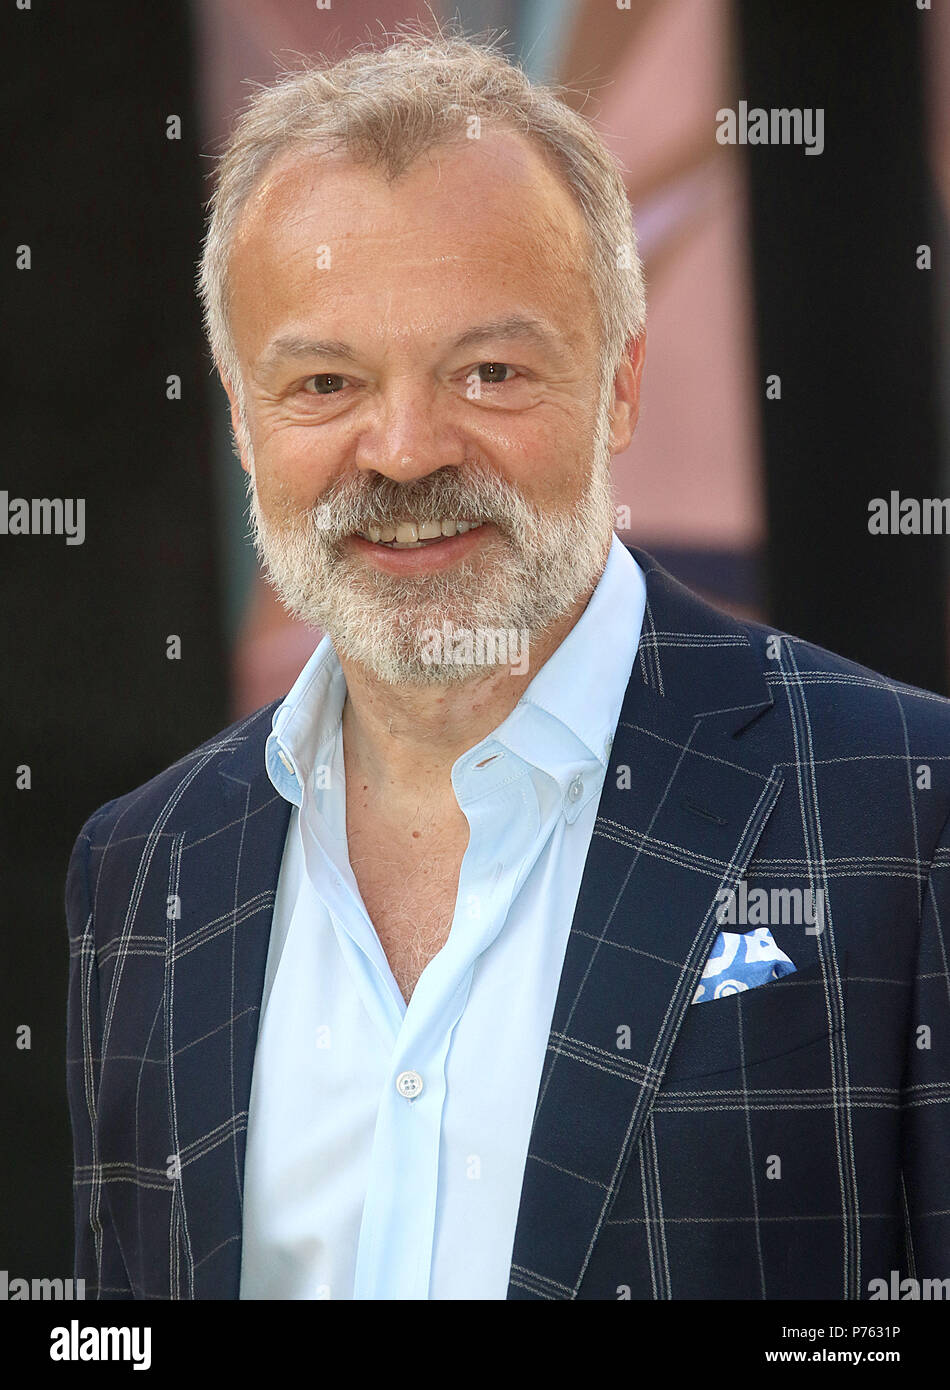 Jun 06, 2018 - Graham Norton attending Royal Academy Of Arts 250th Summer Exhibition Preview Party at Burlington House in London, England, UK Stock Photo